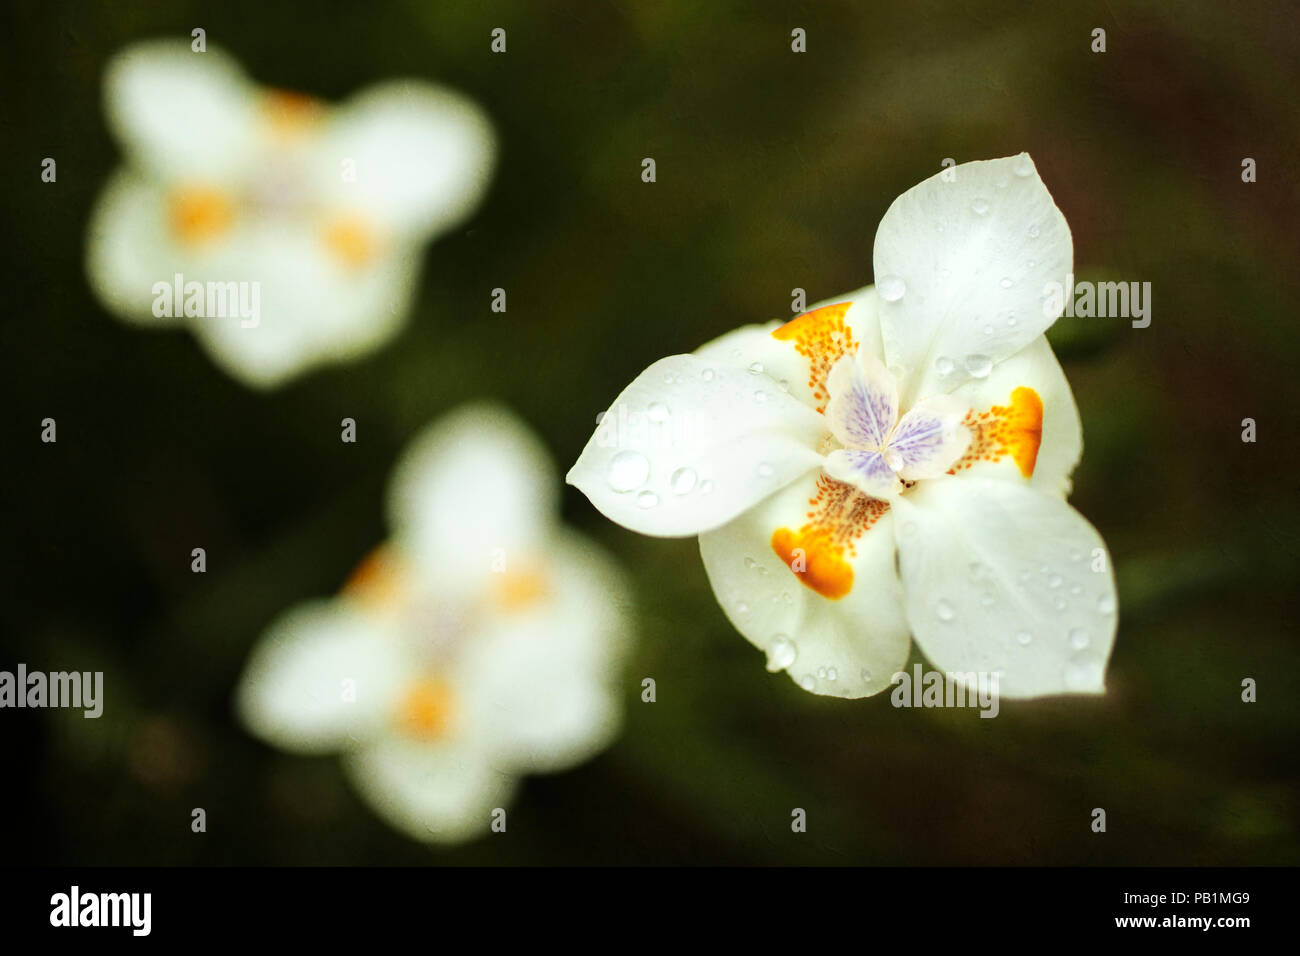 White Dietes Flower with orange and purple markings delicately blooming Stock Photo